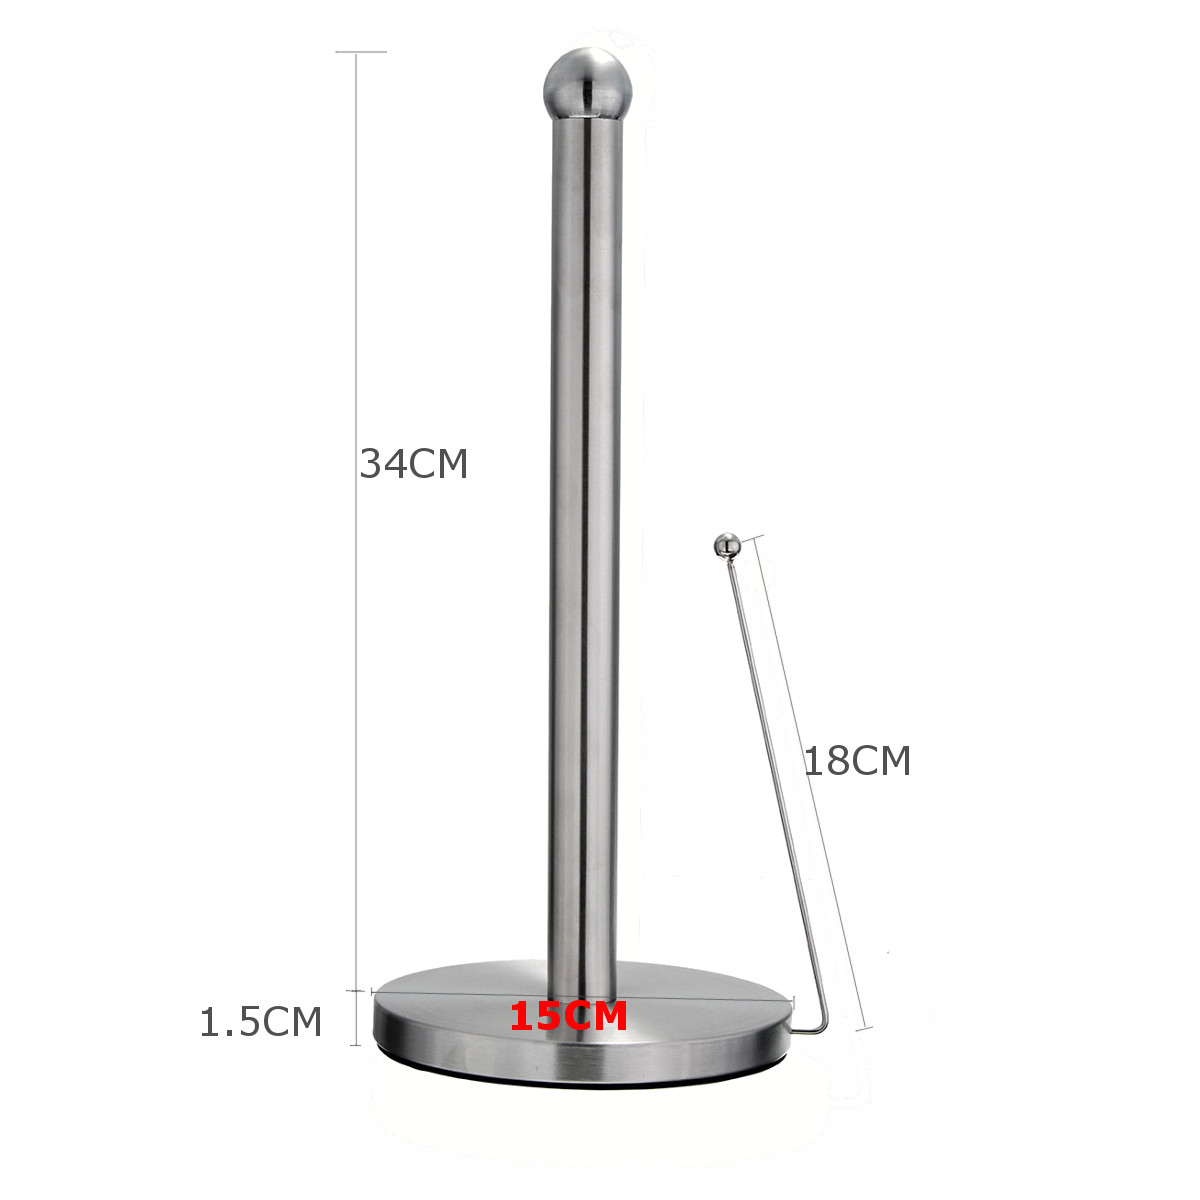 Free-Standing-Paper-Towel-Holder-Hook-Stainless-Steel-Kitchen-Roll-Suction-Base-1051418